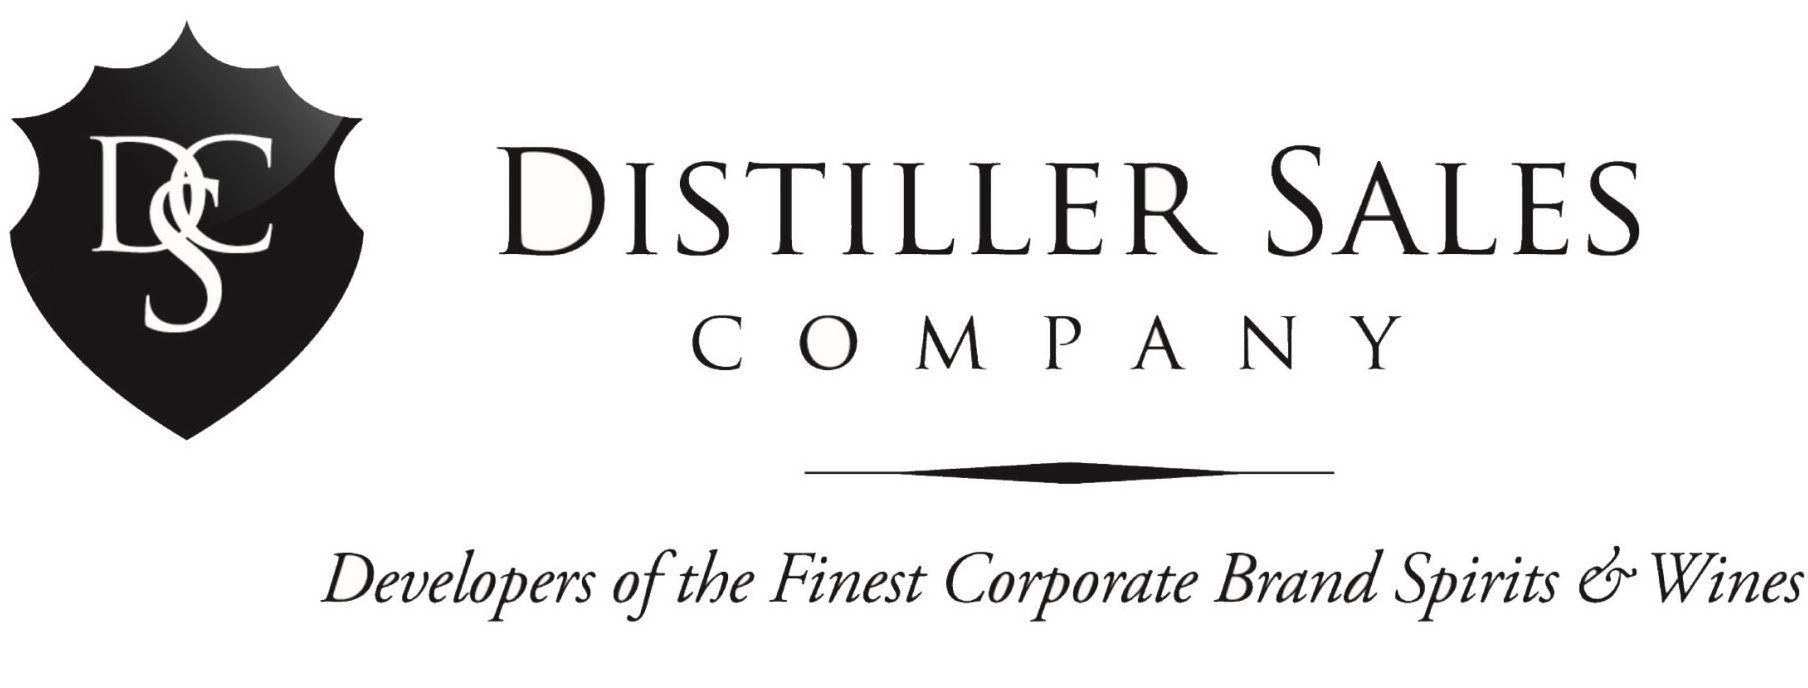  DSC DISTILLER SALES COMPANY DEVELOPERS OF THE FINEST CORPORATE BRAND SPIRITS &amp; WINES